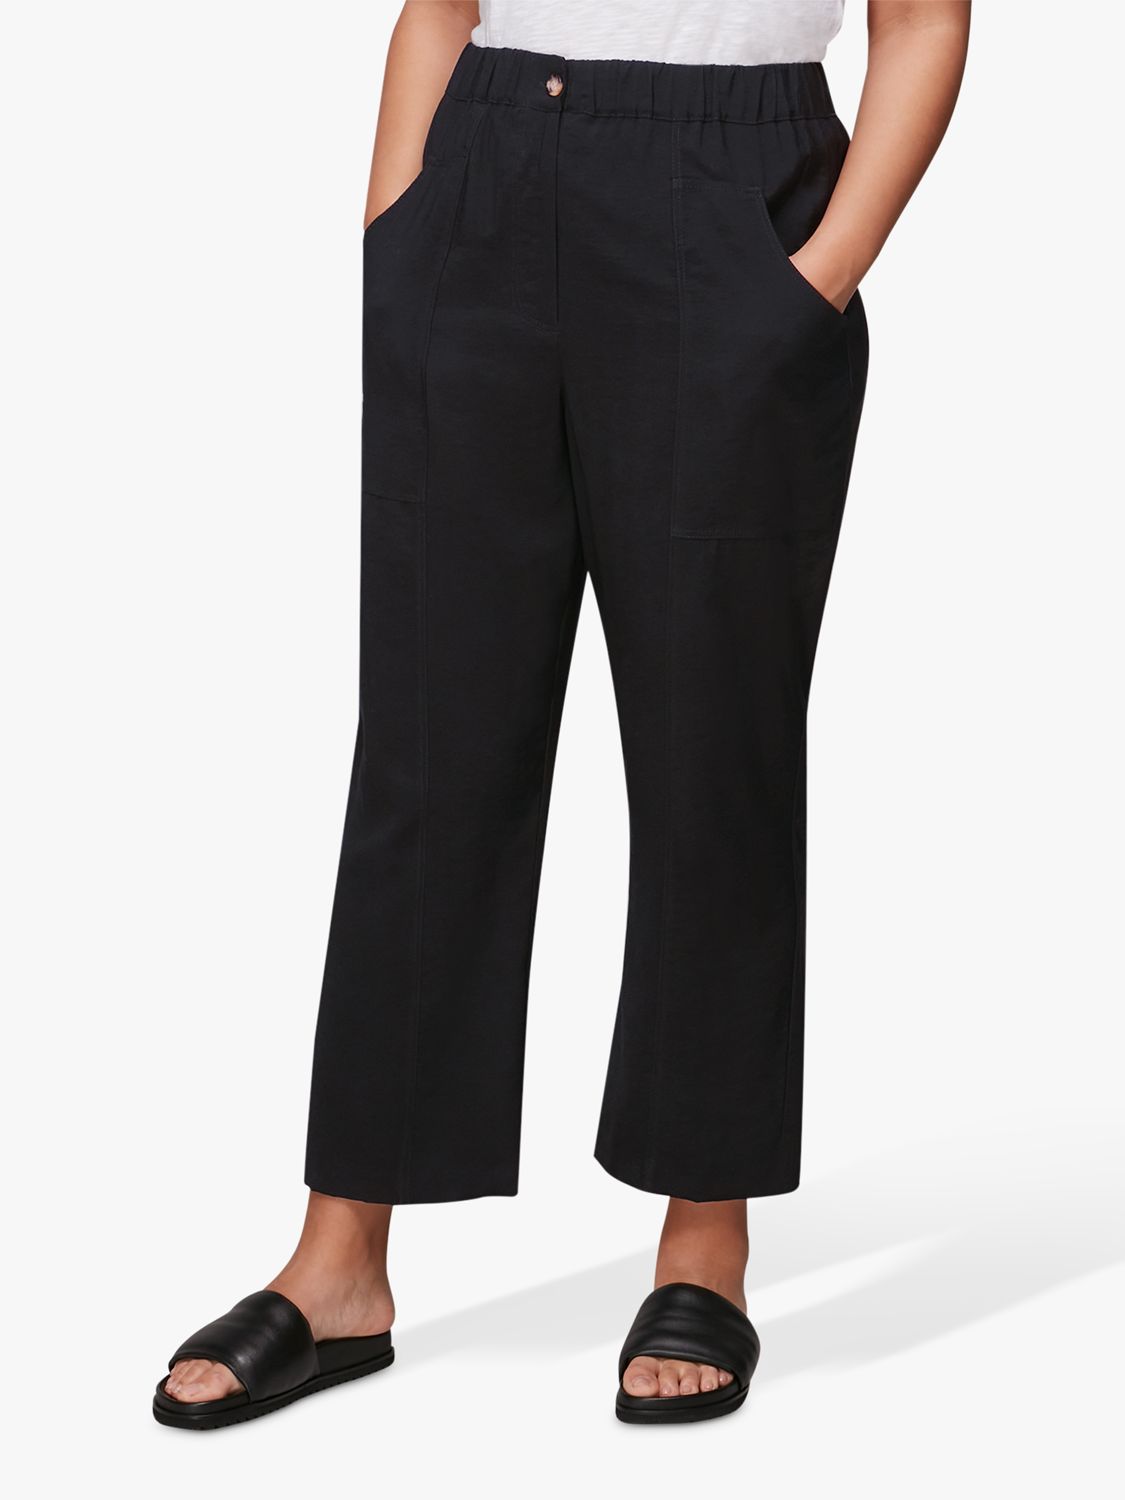 Whistles Easy Casual Trousers, Black at John Lewis & Partners